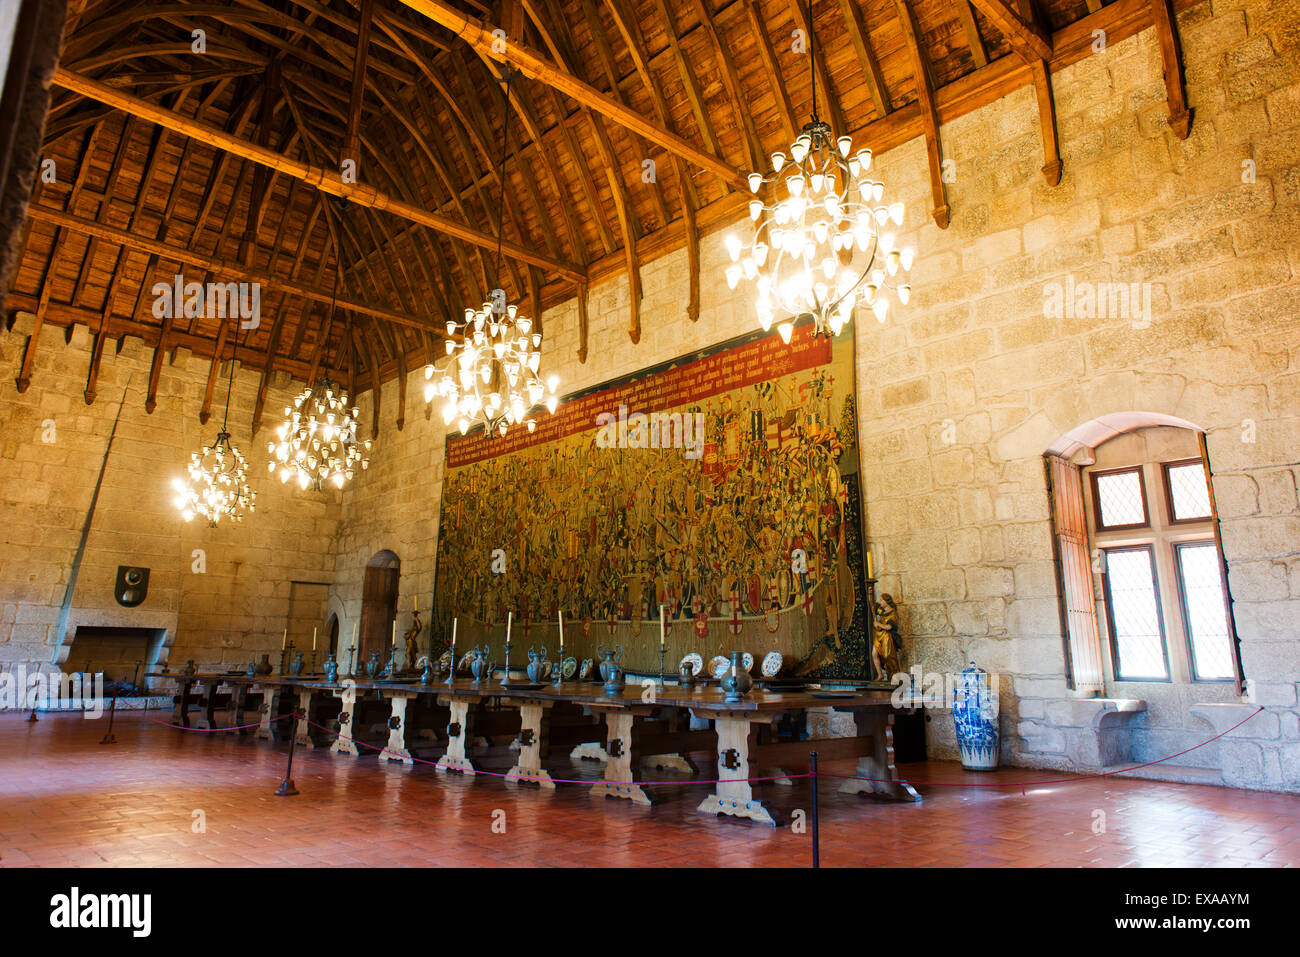 The Great Hall in The Palace of the Dukes of Braganza in Guimaraes. Stock Photo